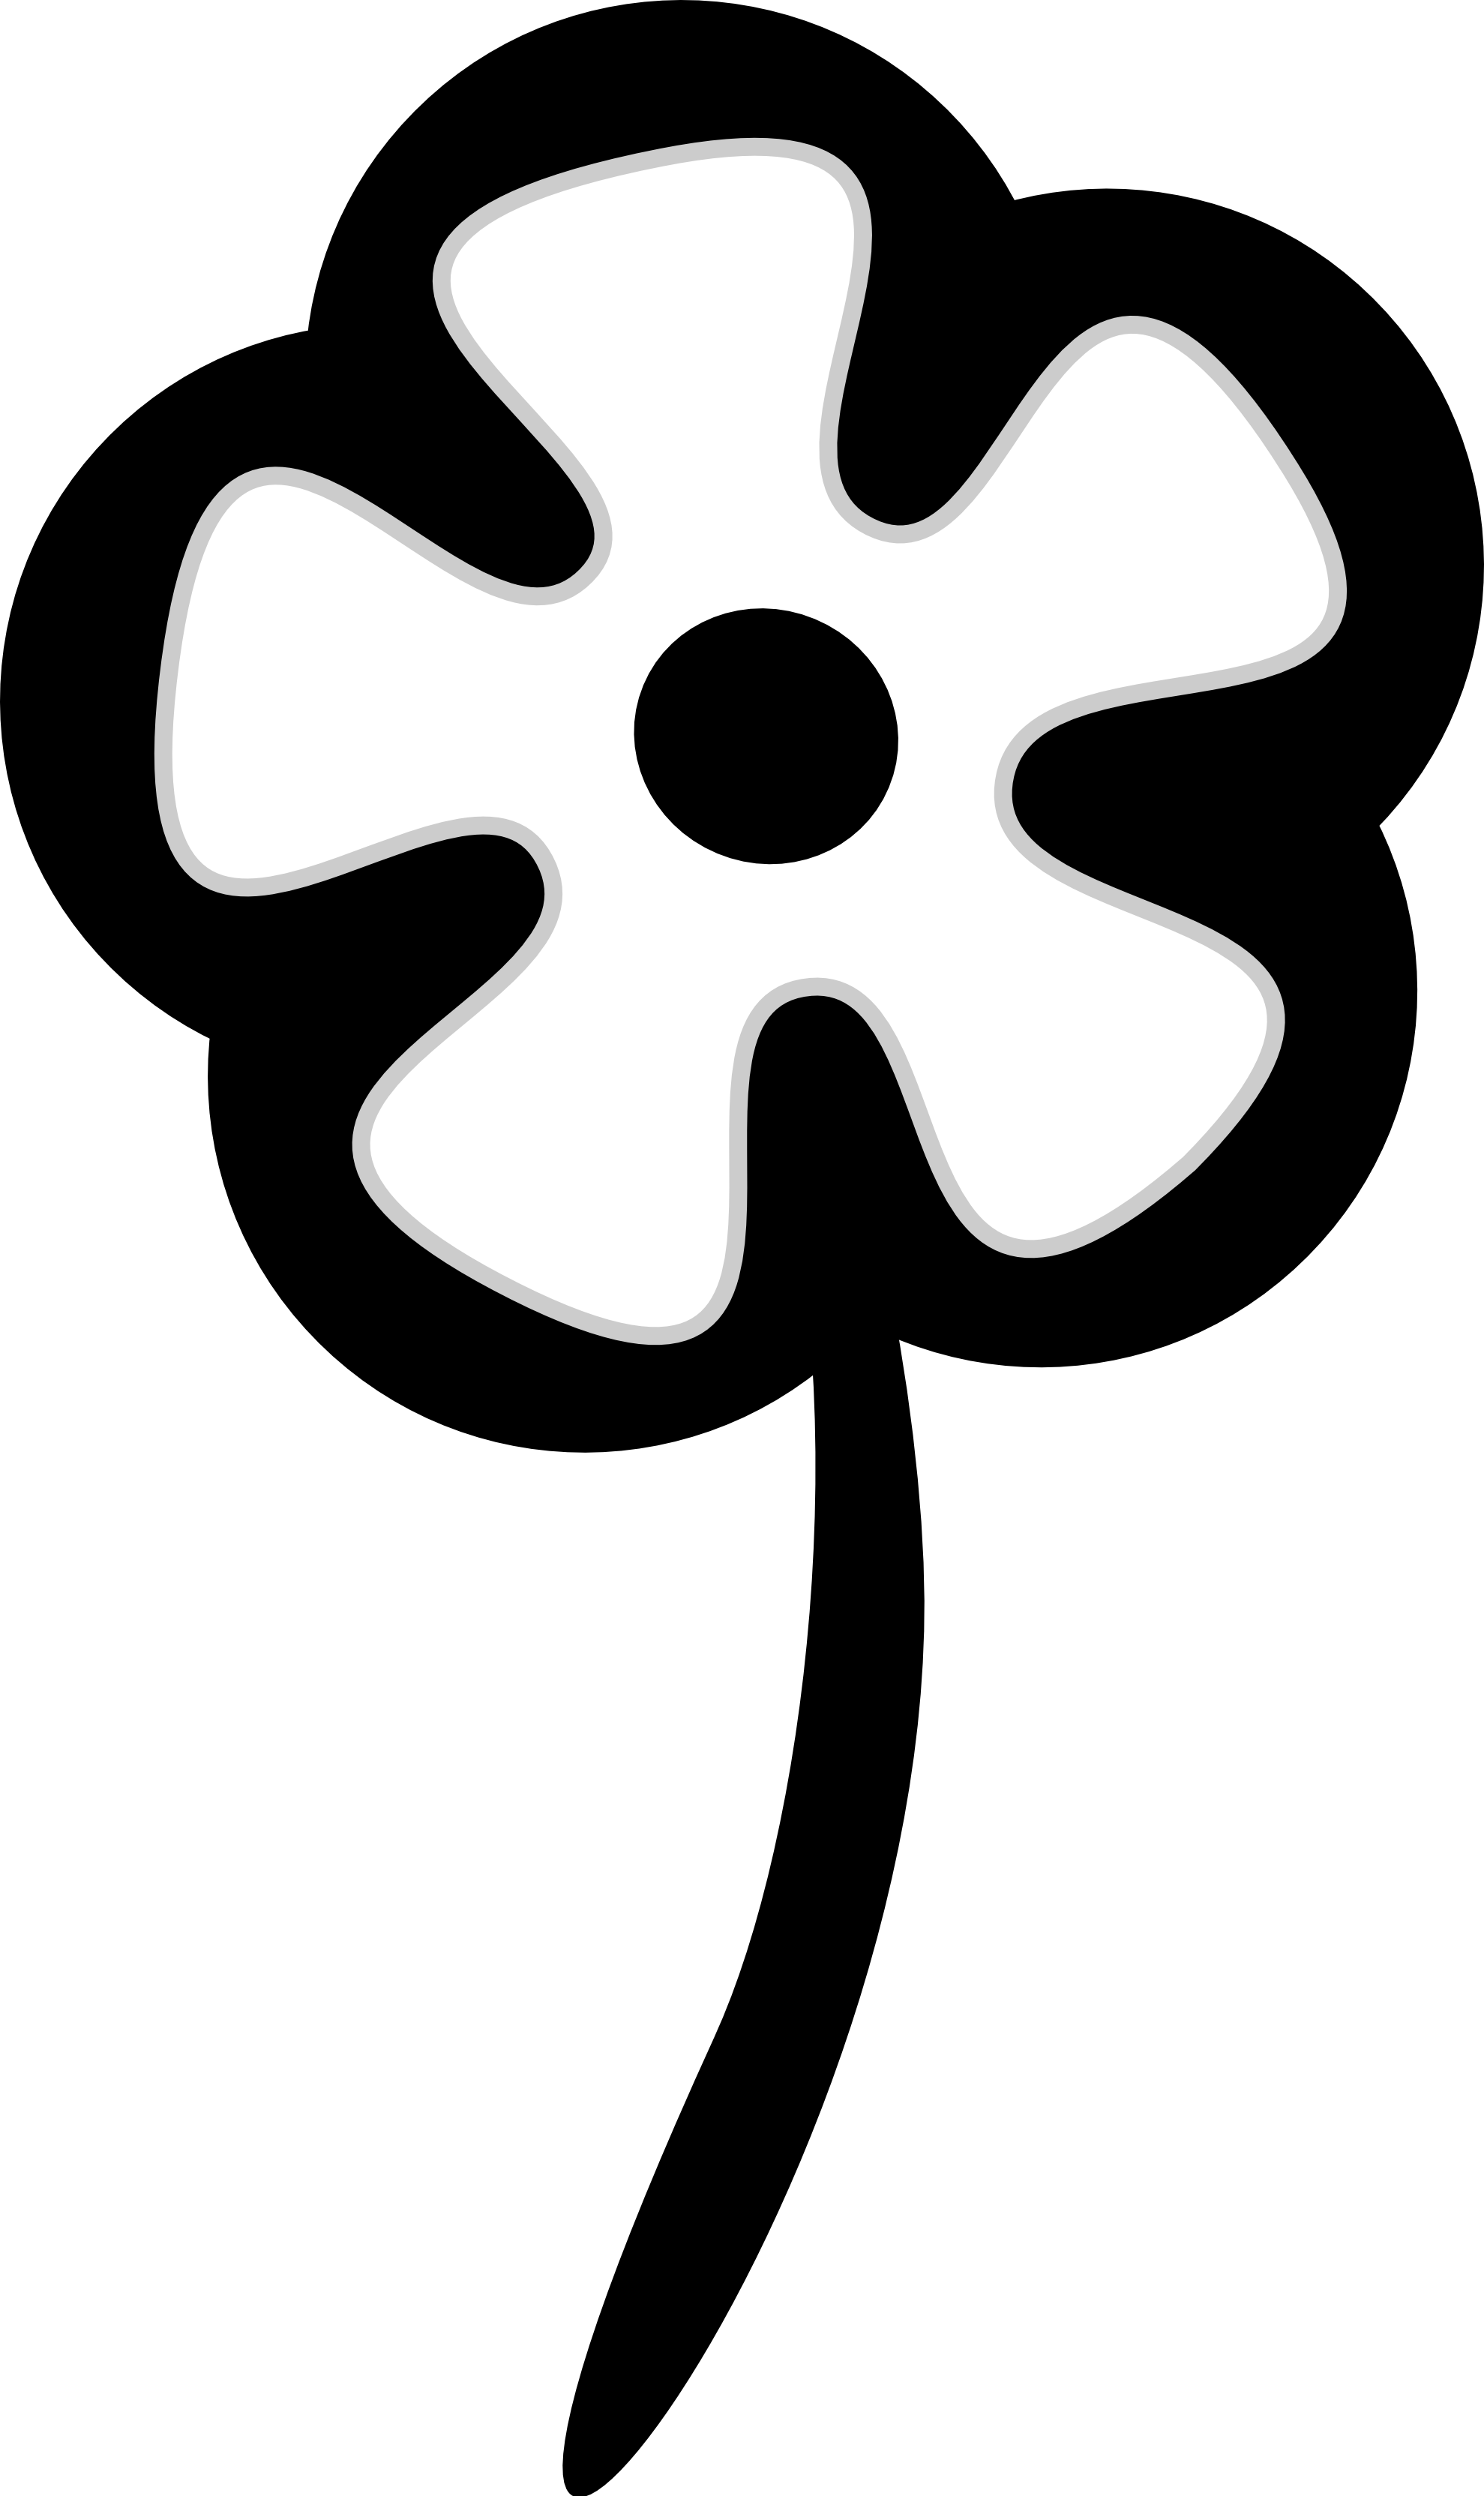 Flower black and white flowers black and white clip art co